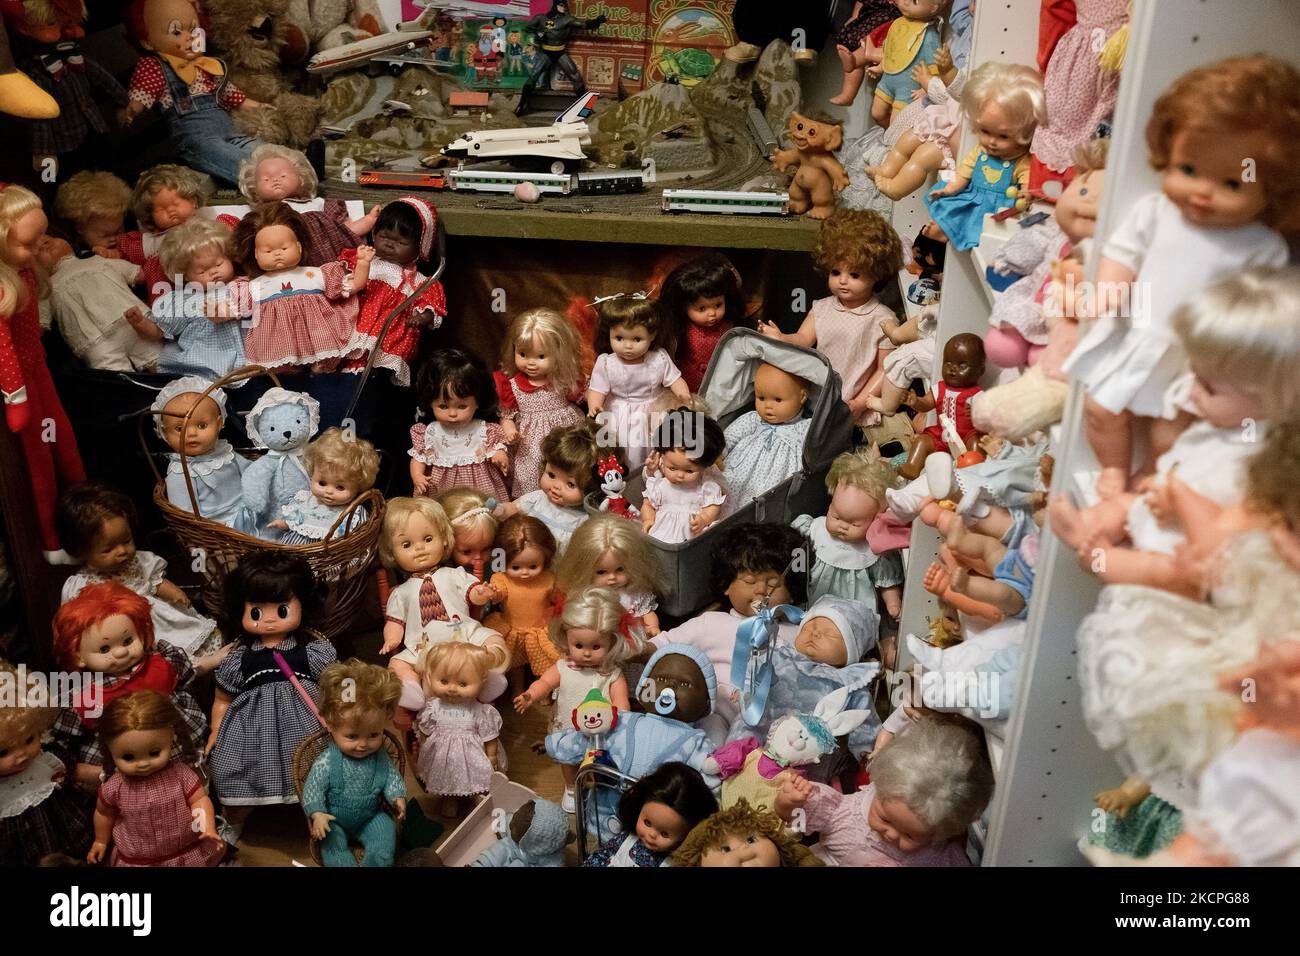 Dolls are seen at the museum area of the 'Hospital de Bonecas' in Lisbon, Portugal on October 12, 2021. Started in 1830 by Dona Carlota, an old lady making rag dolls in her small dried herbs store, at the 'Hospital de Bonecas' all sorts of dolls are being fixed and restored by specialists. The premises also host a museum, that is one of many attractions Lisbon offers to visitors. (Photo by Nikolas Kokovlis/NurPhoto) Stock Photo